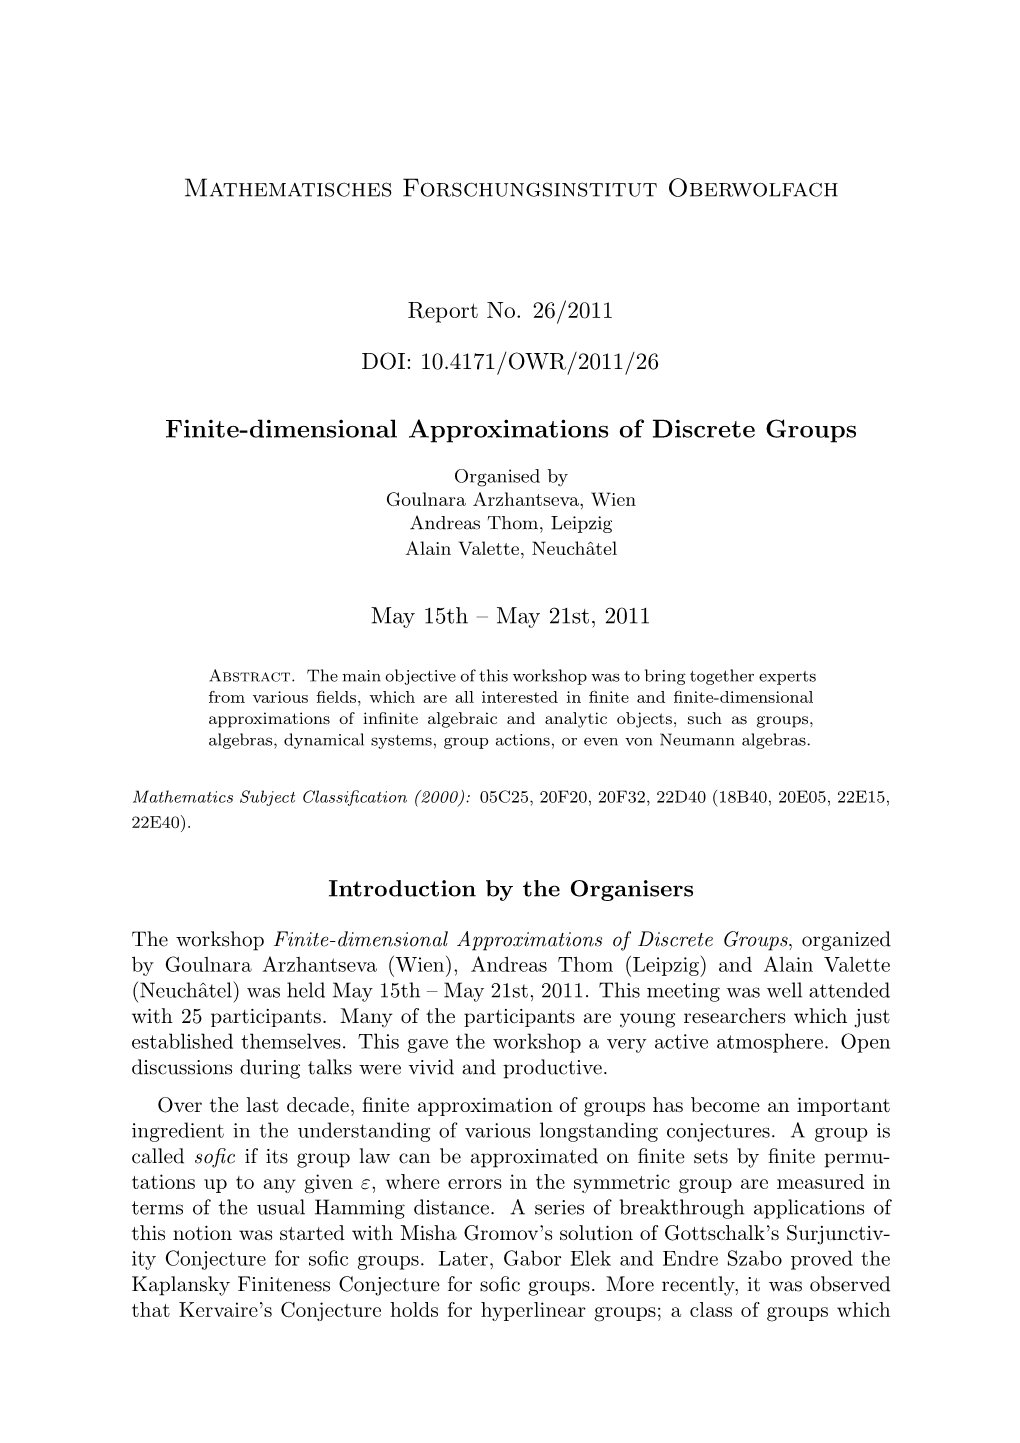 Finite-Dimensional Approximations of Discrete Groups